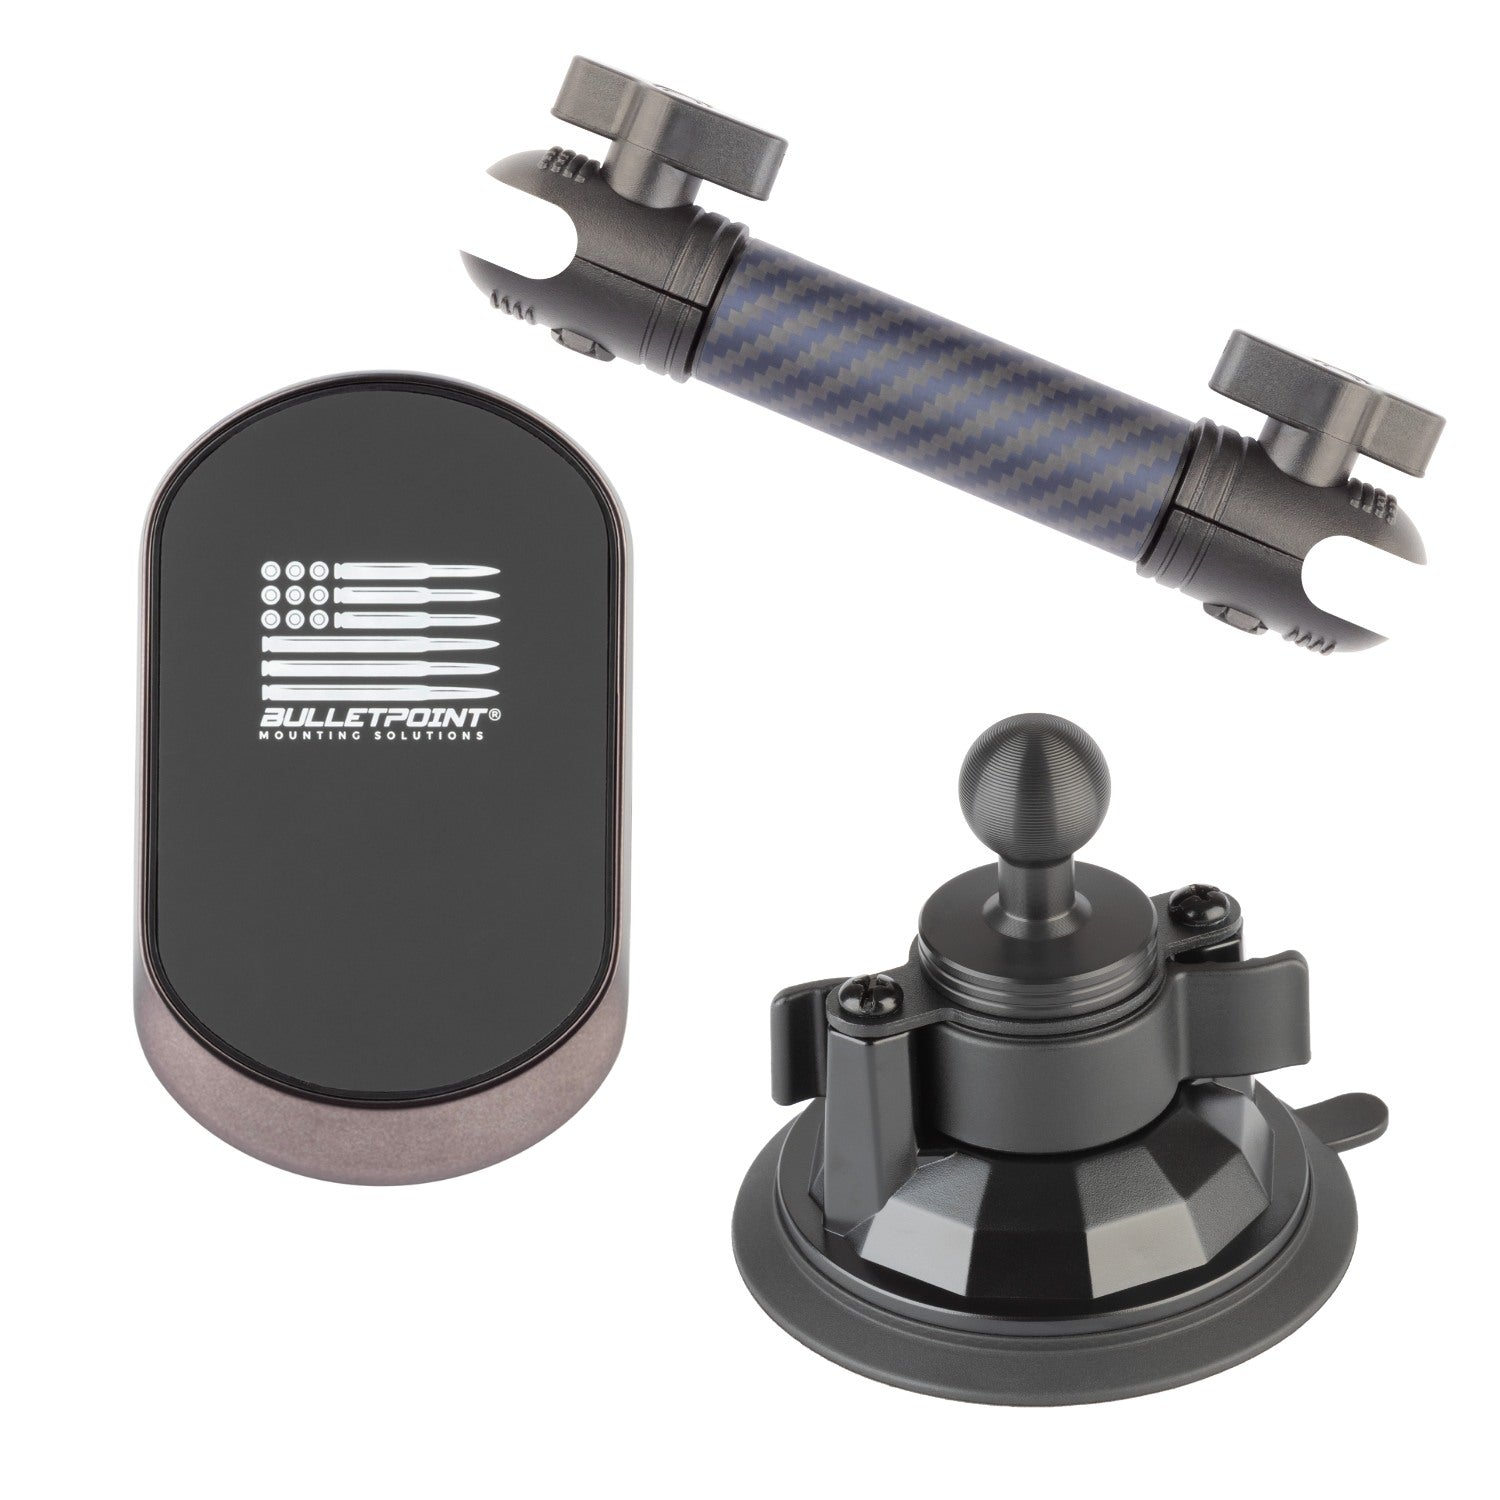 Suction Cup Mount 3.4 Diameter with Integrated 20mm Mounting Ball -  Bulletpoint Mounting Solutions